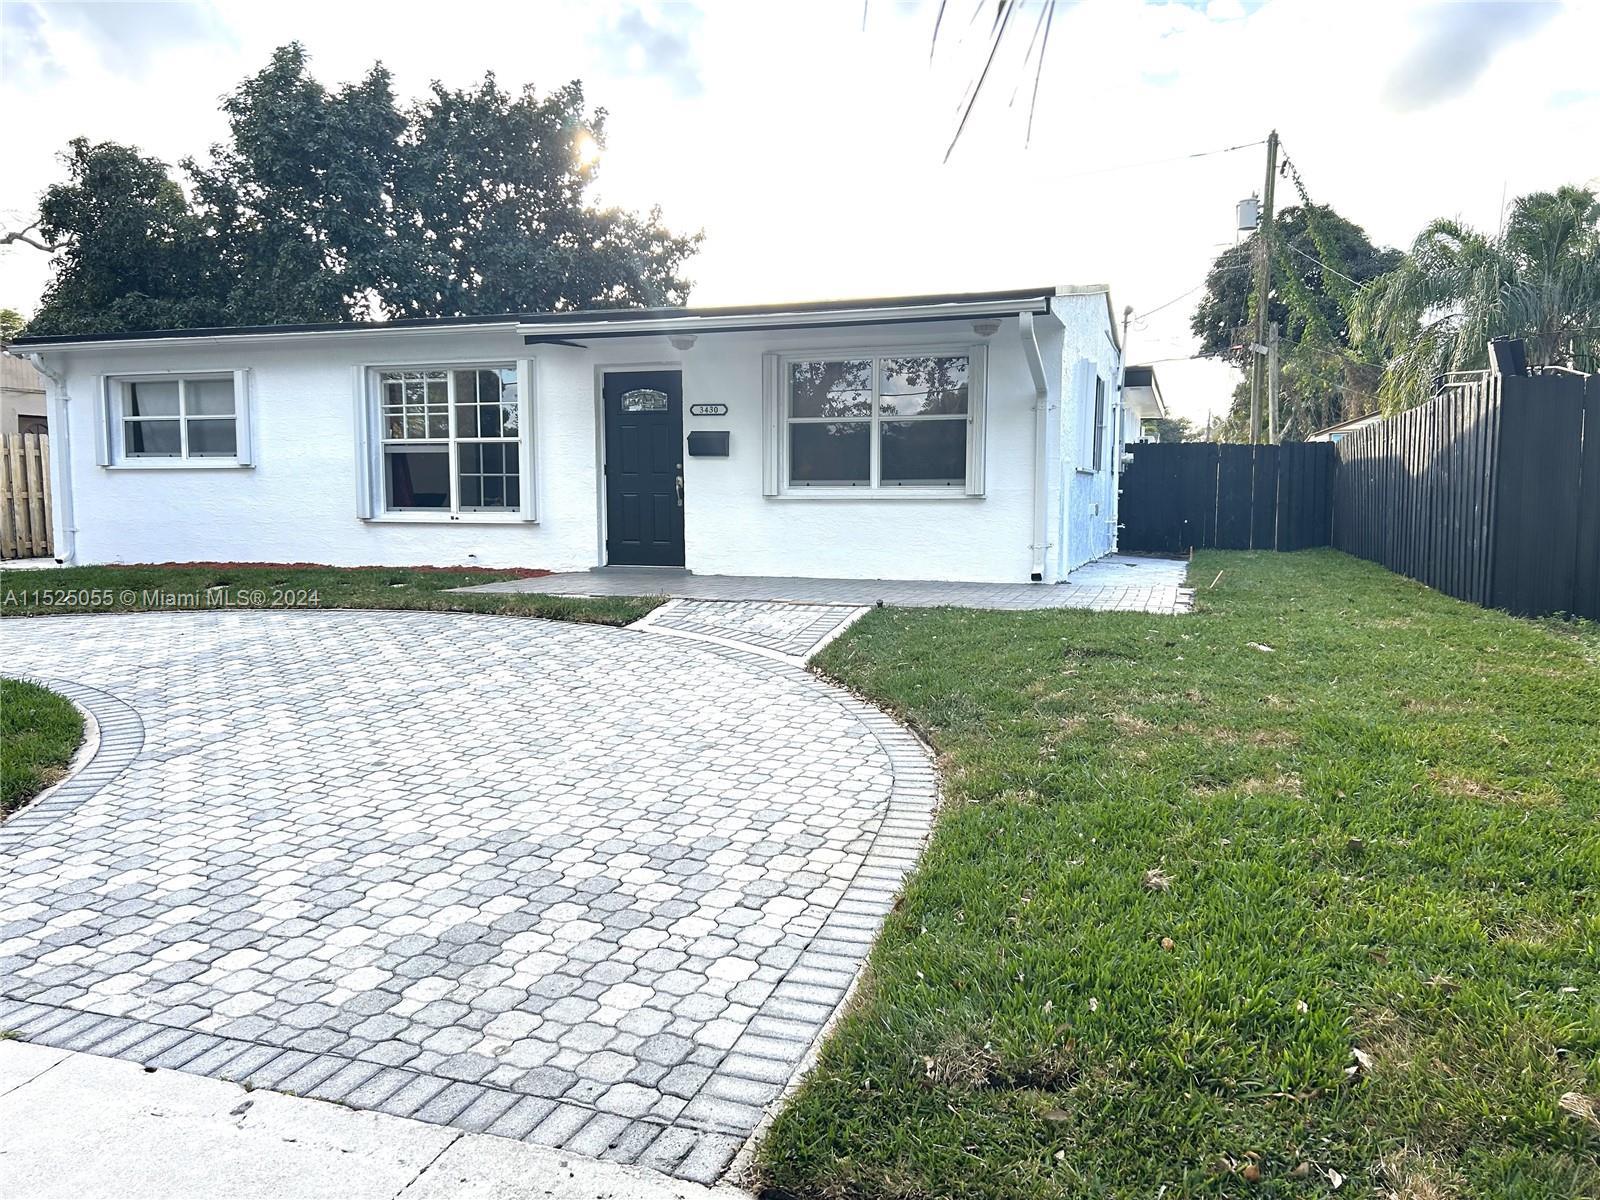 Photo of 3430 N 72nd Ave in Hollywood, FL